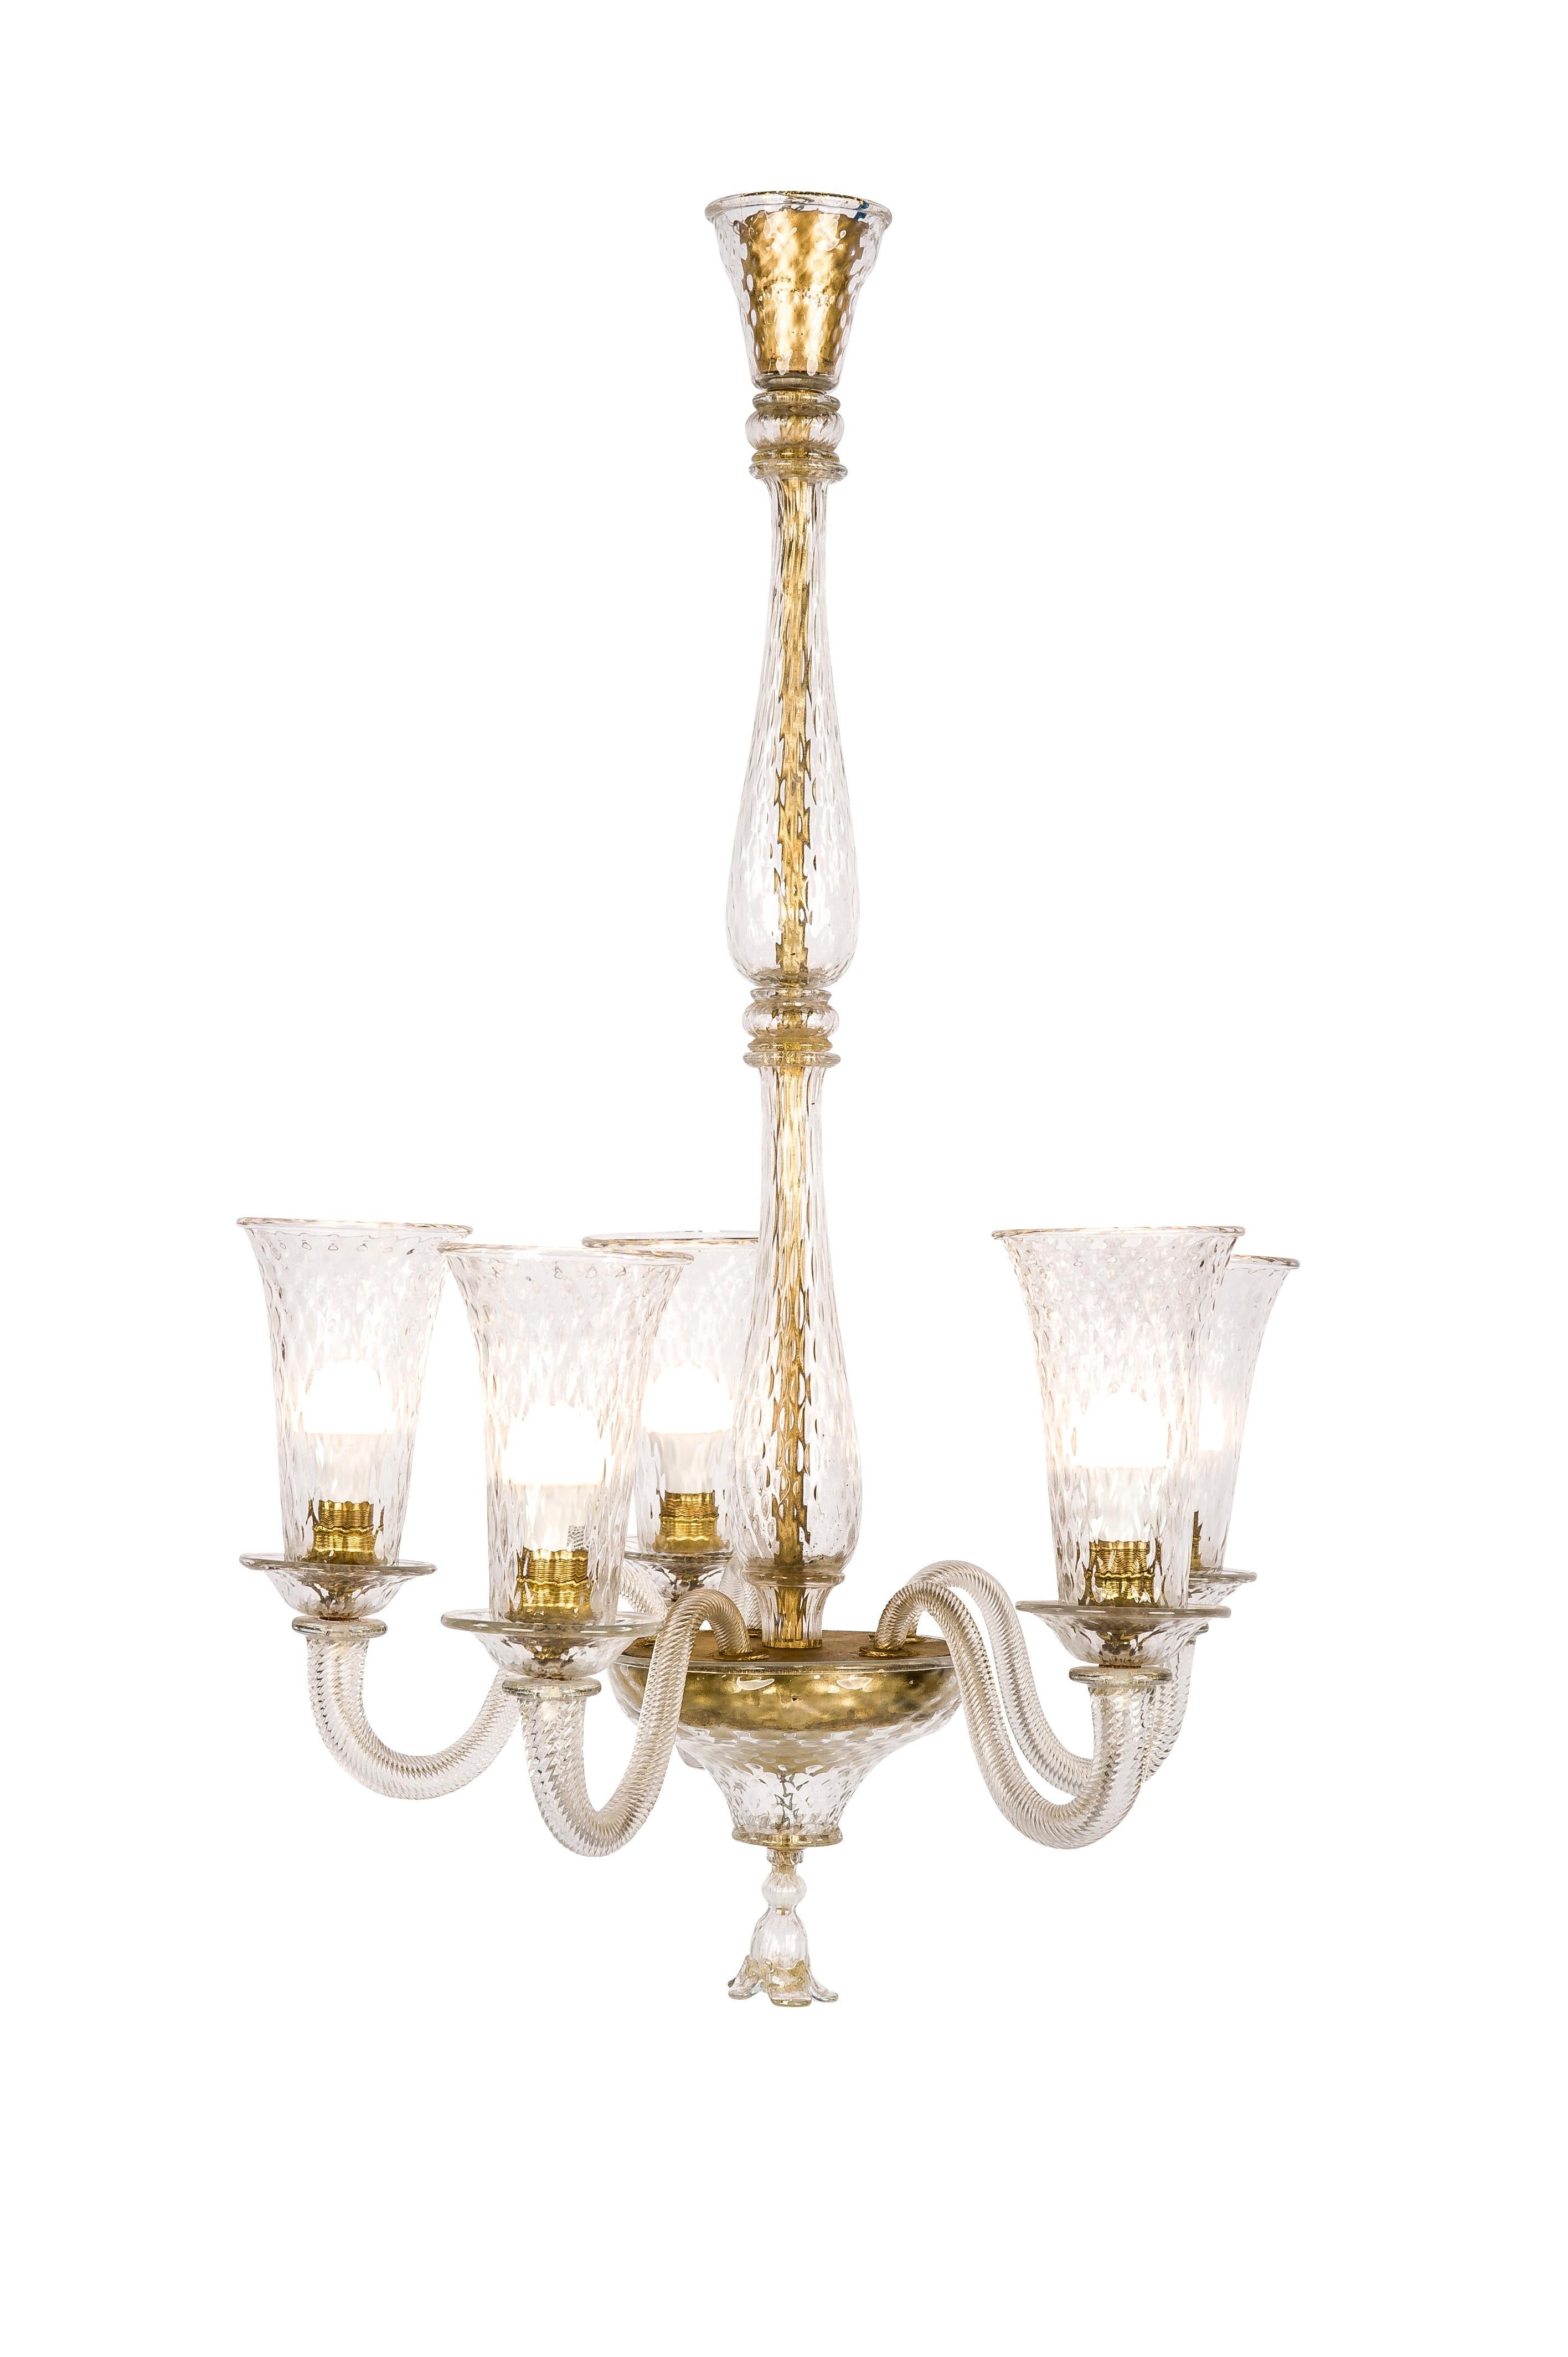 A beautiful Venetian five-arm chandelier made on the isle of Murano in Venice Italy. The chandelier was completely made in clear glass and some parts, 24-carat gold flakes were encapsulated in the glass. The piece has five fluted and twisted scroll